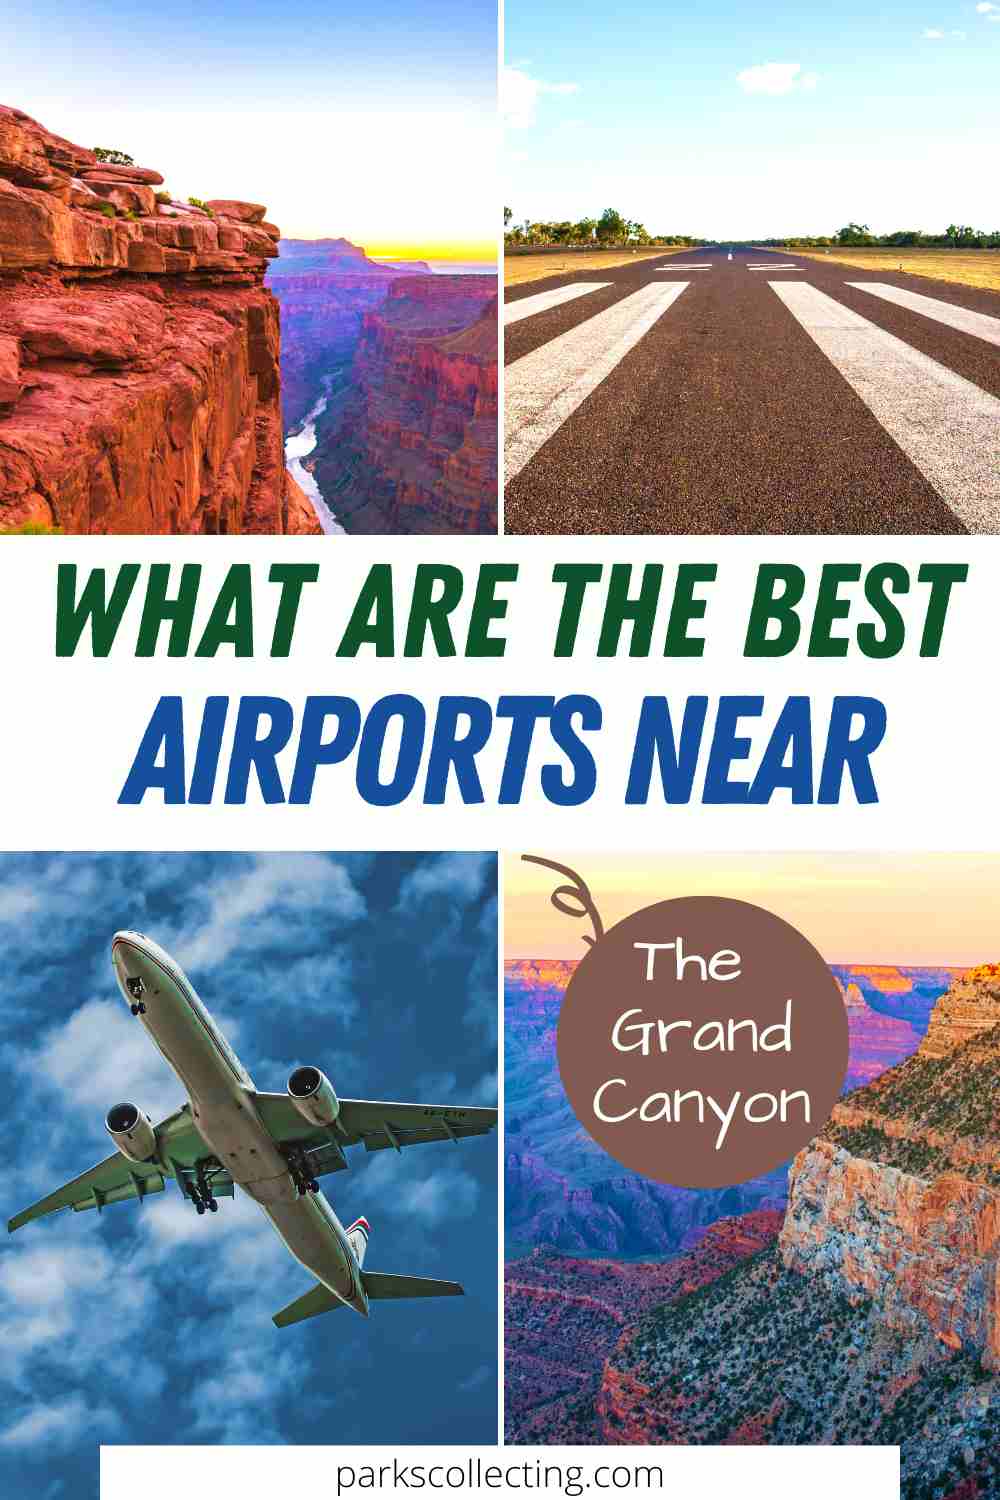 Complete Guide To All The Airports Near Grand Canyon SHORT 22Q4 1 